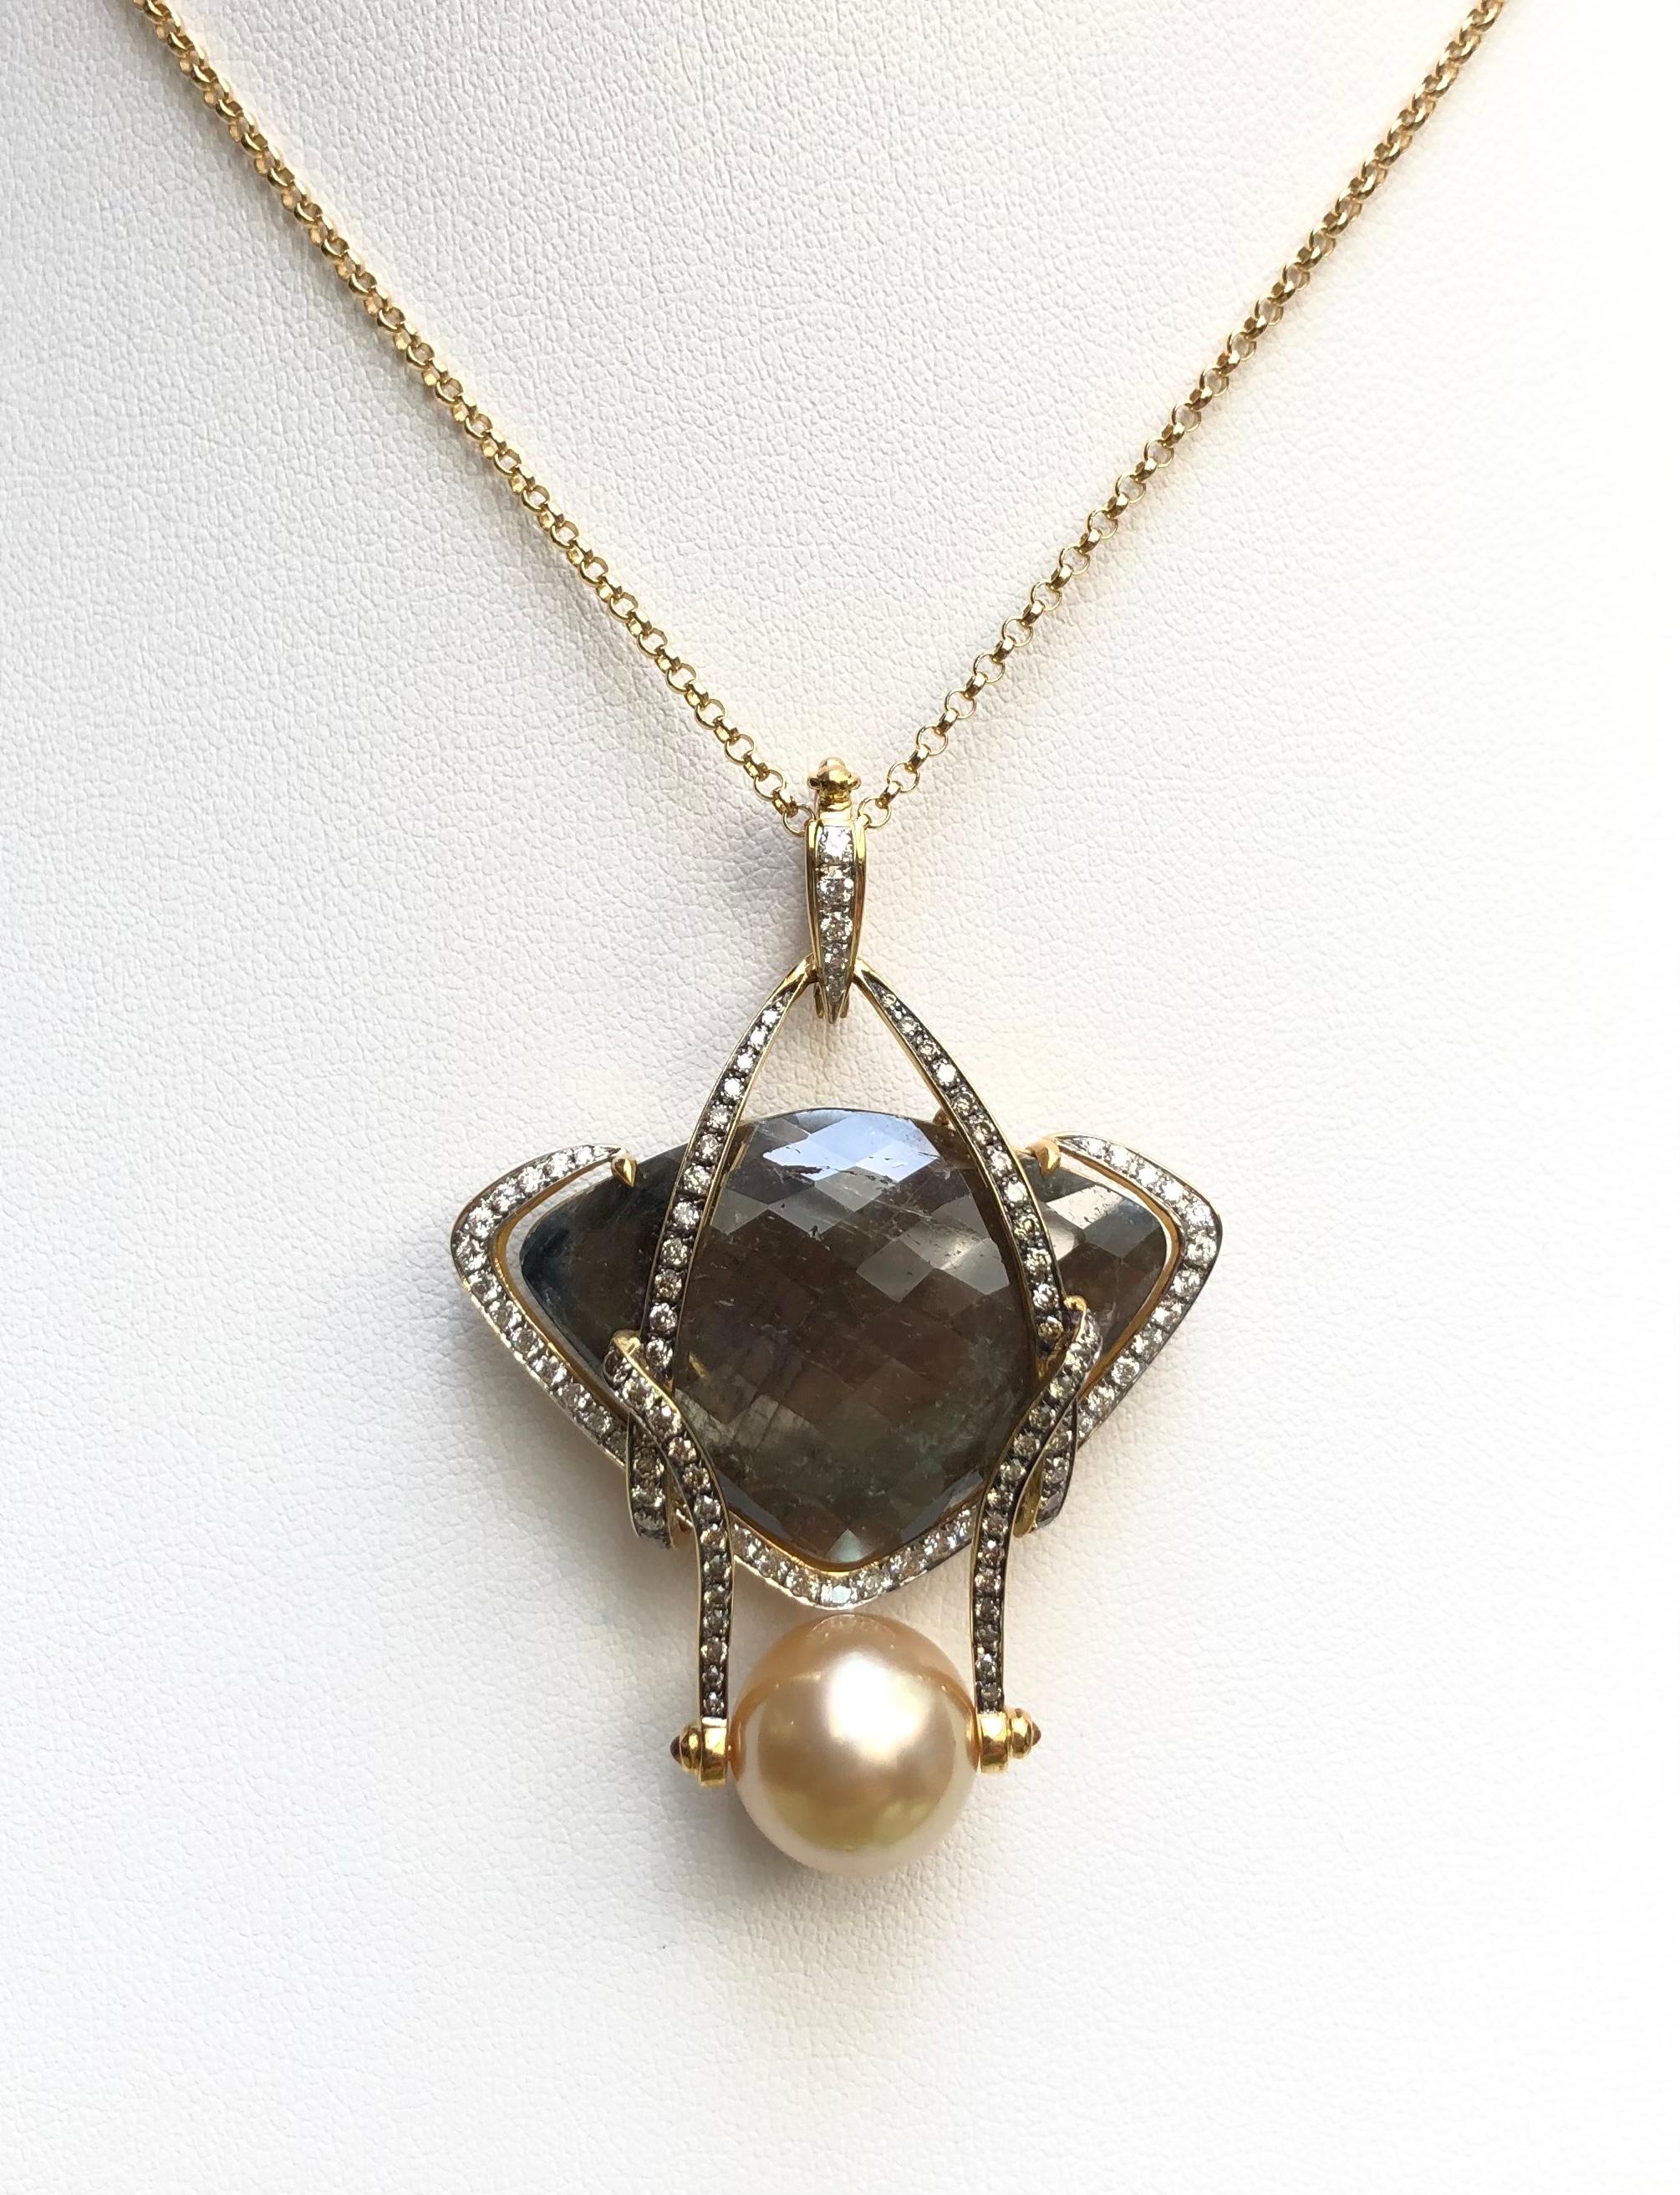 South Sea Pearl, Rough Sapphire 39.25 carats, Yellow Sapphire 0.04 carat, Brown Diamond 0.76 carat and Diamond  0.65 carat Pendant set in 18 Karat Gold Settings
(chain not included)

Width: 4.0 cm 
Length: 5.5 cm
Total Weight: 20.05 grams

